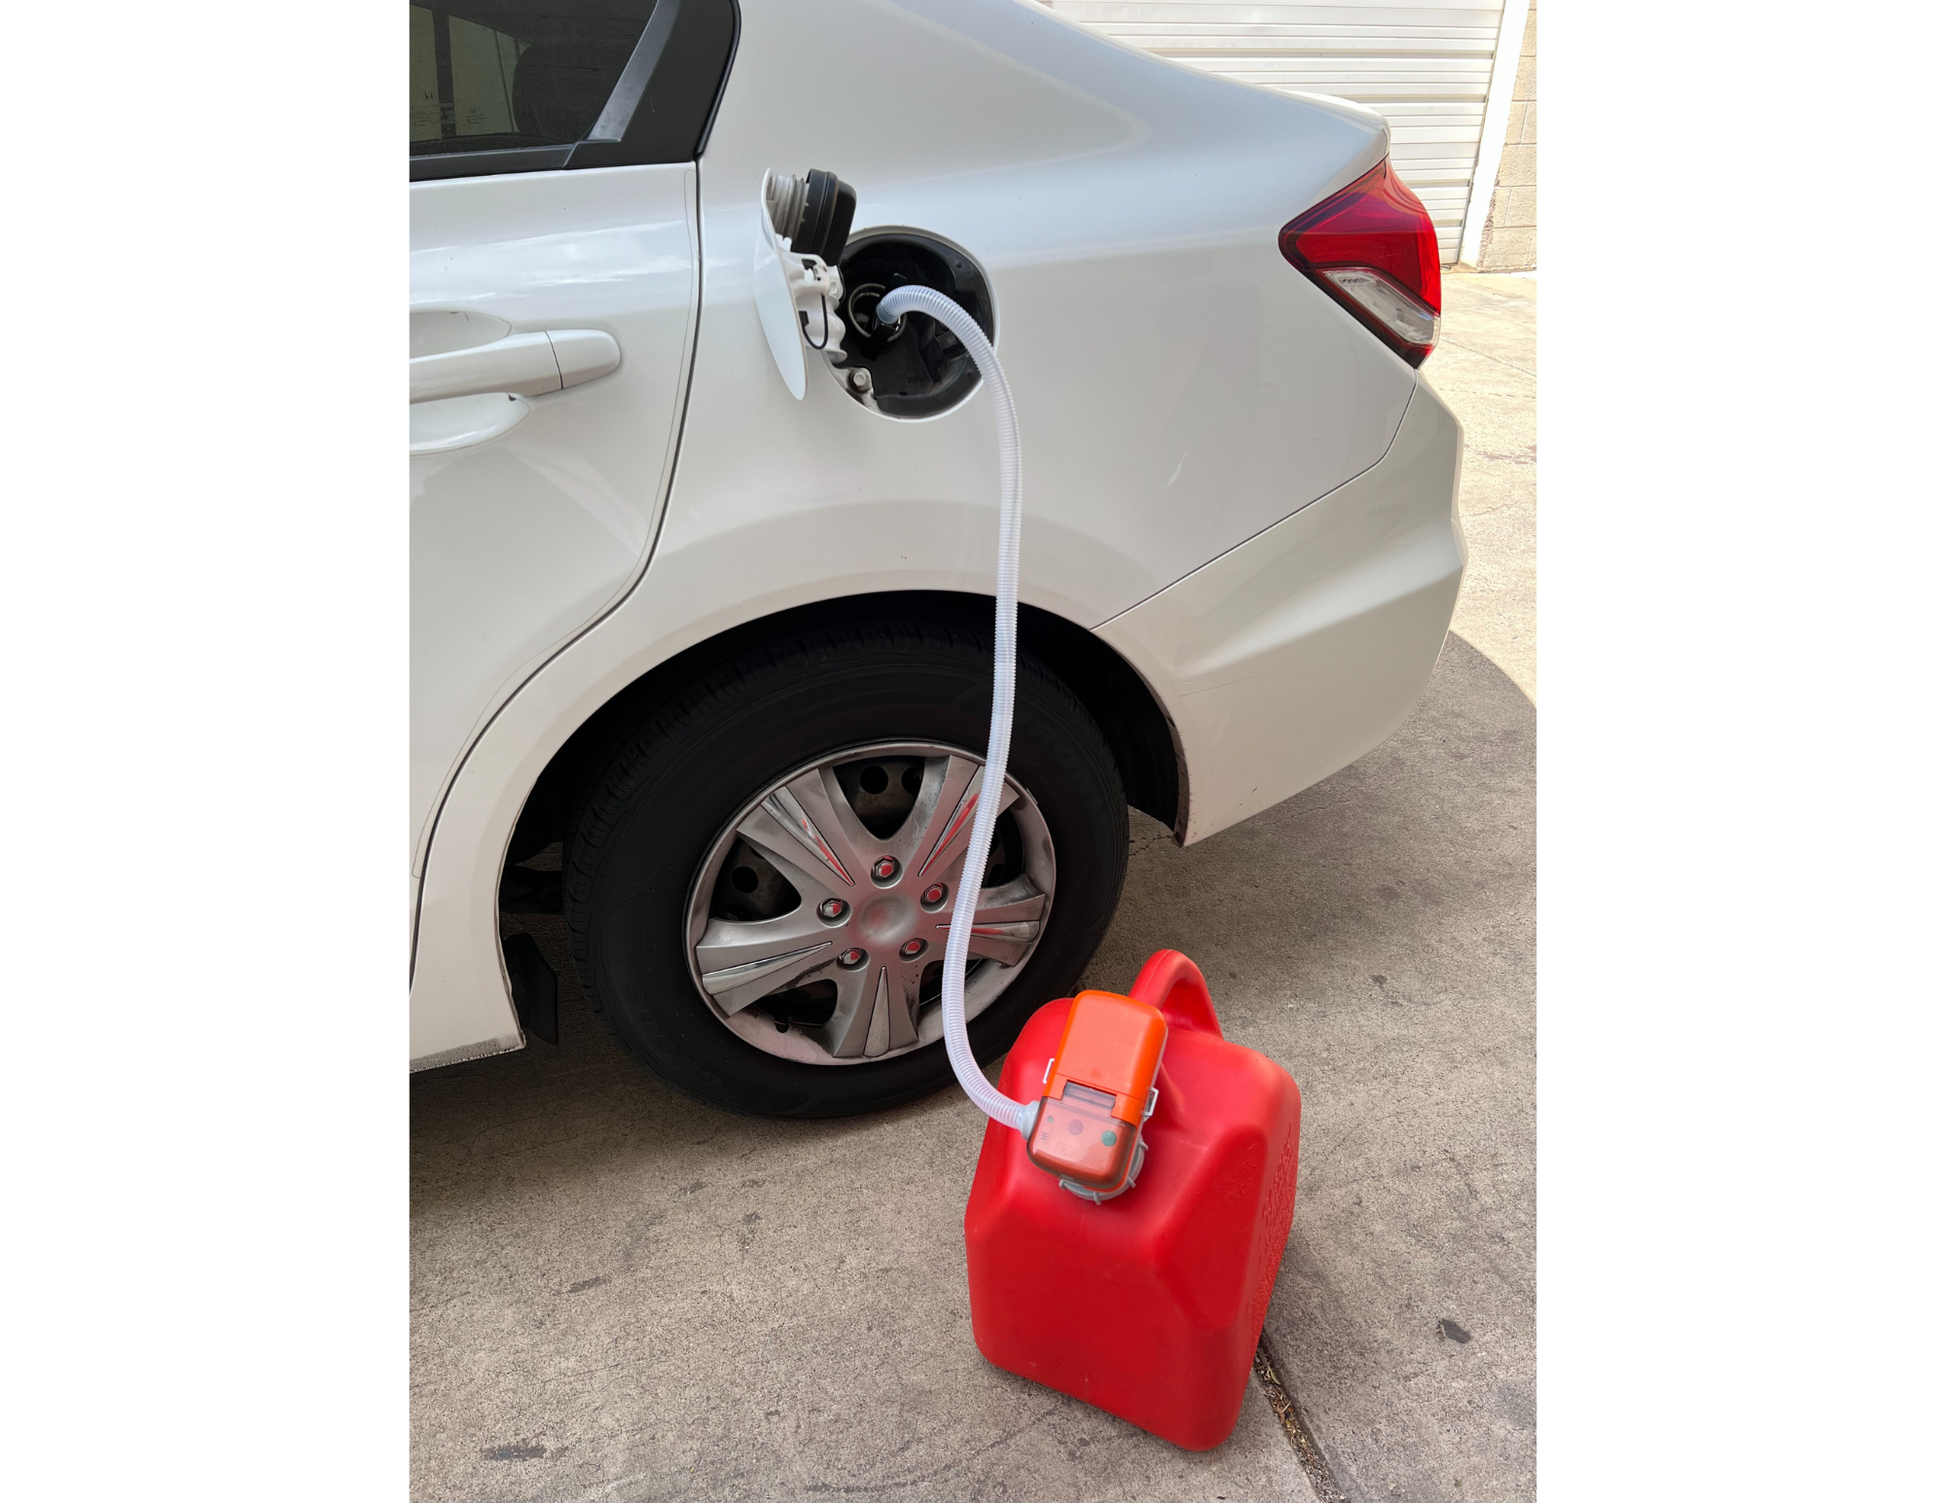 Battery pump by FlowJoe transferring fuel from white car gasoline tank into red can